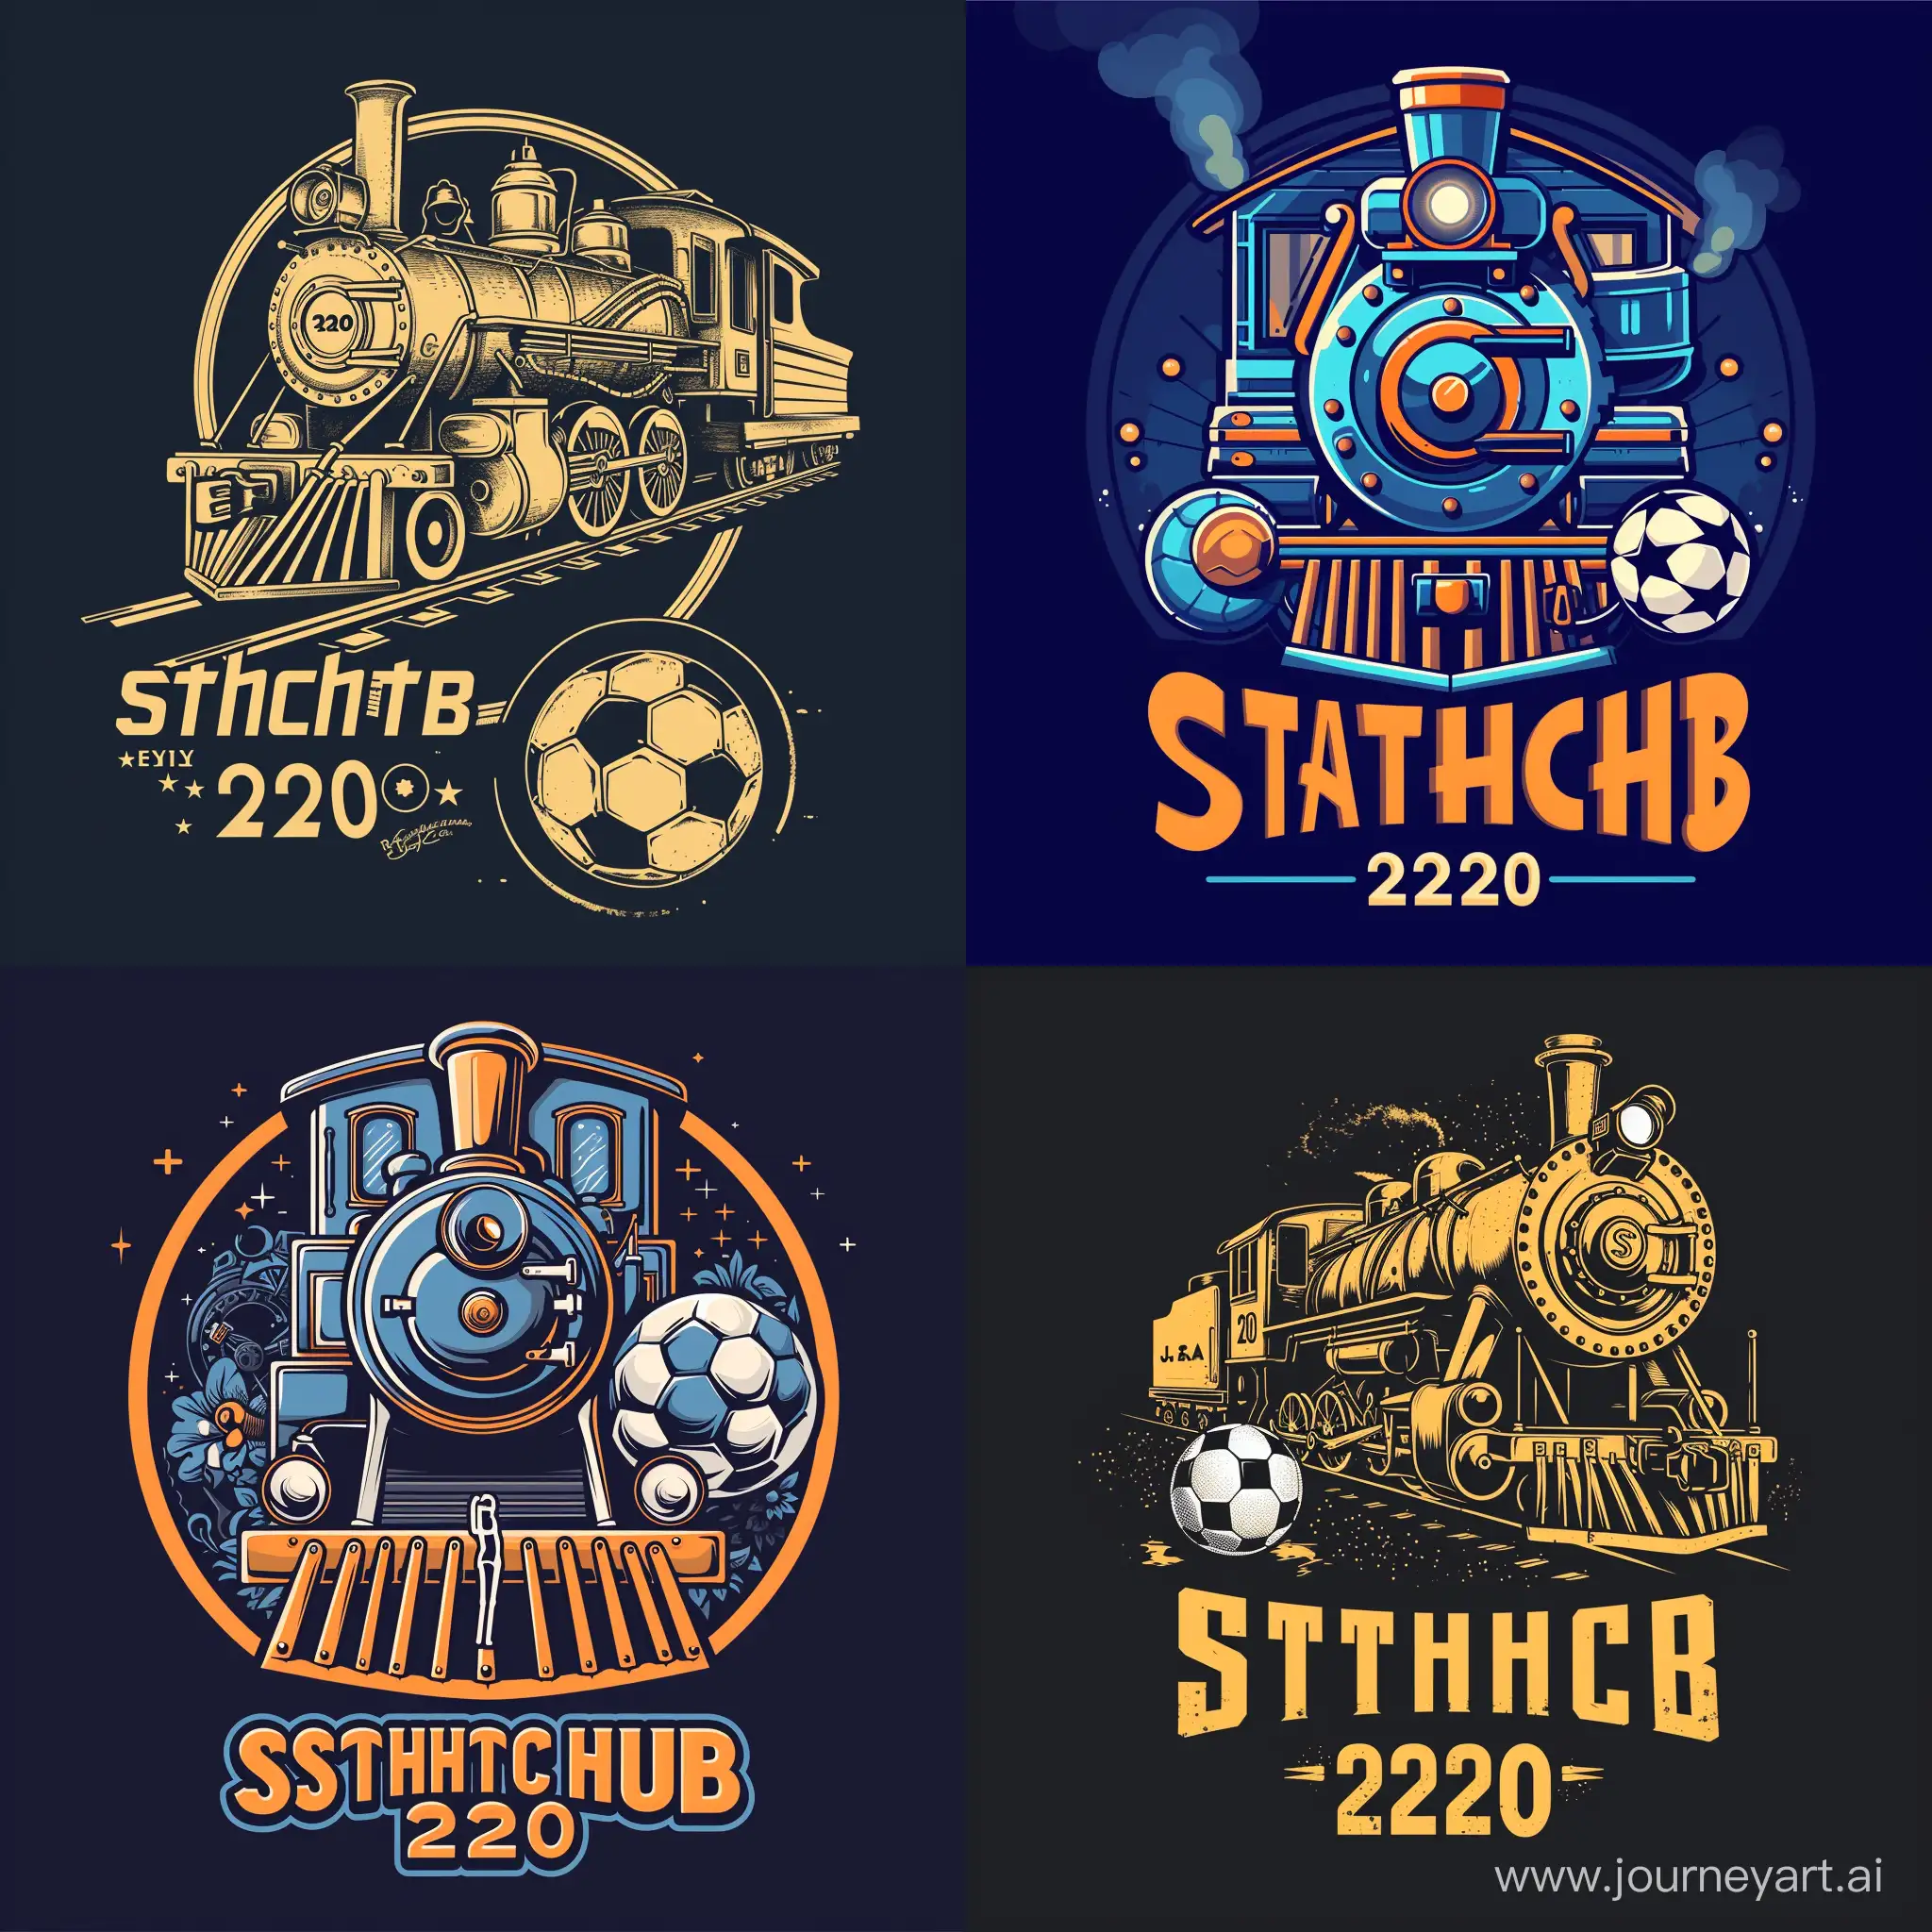 Powerful-and-Unique-Station-Football-Club-Logo-with-Locomotive-Soccer-Ball-and-Established-2020